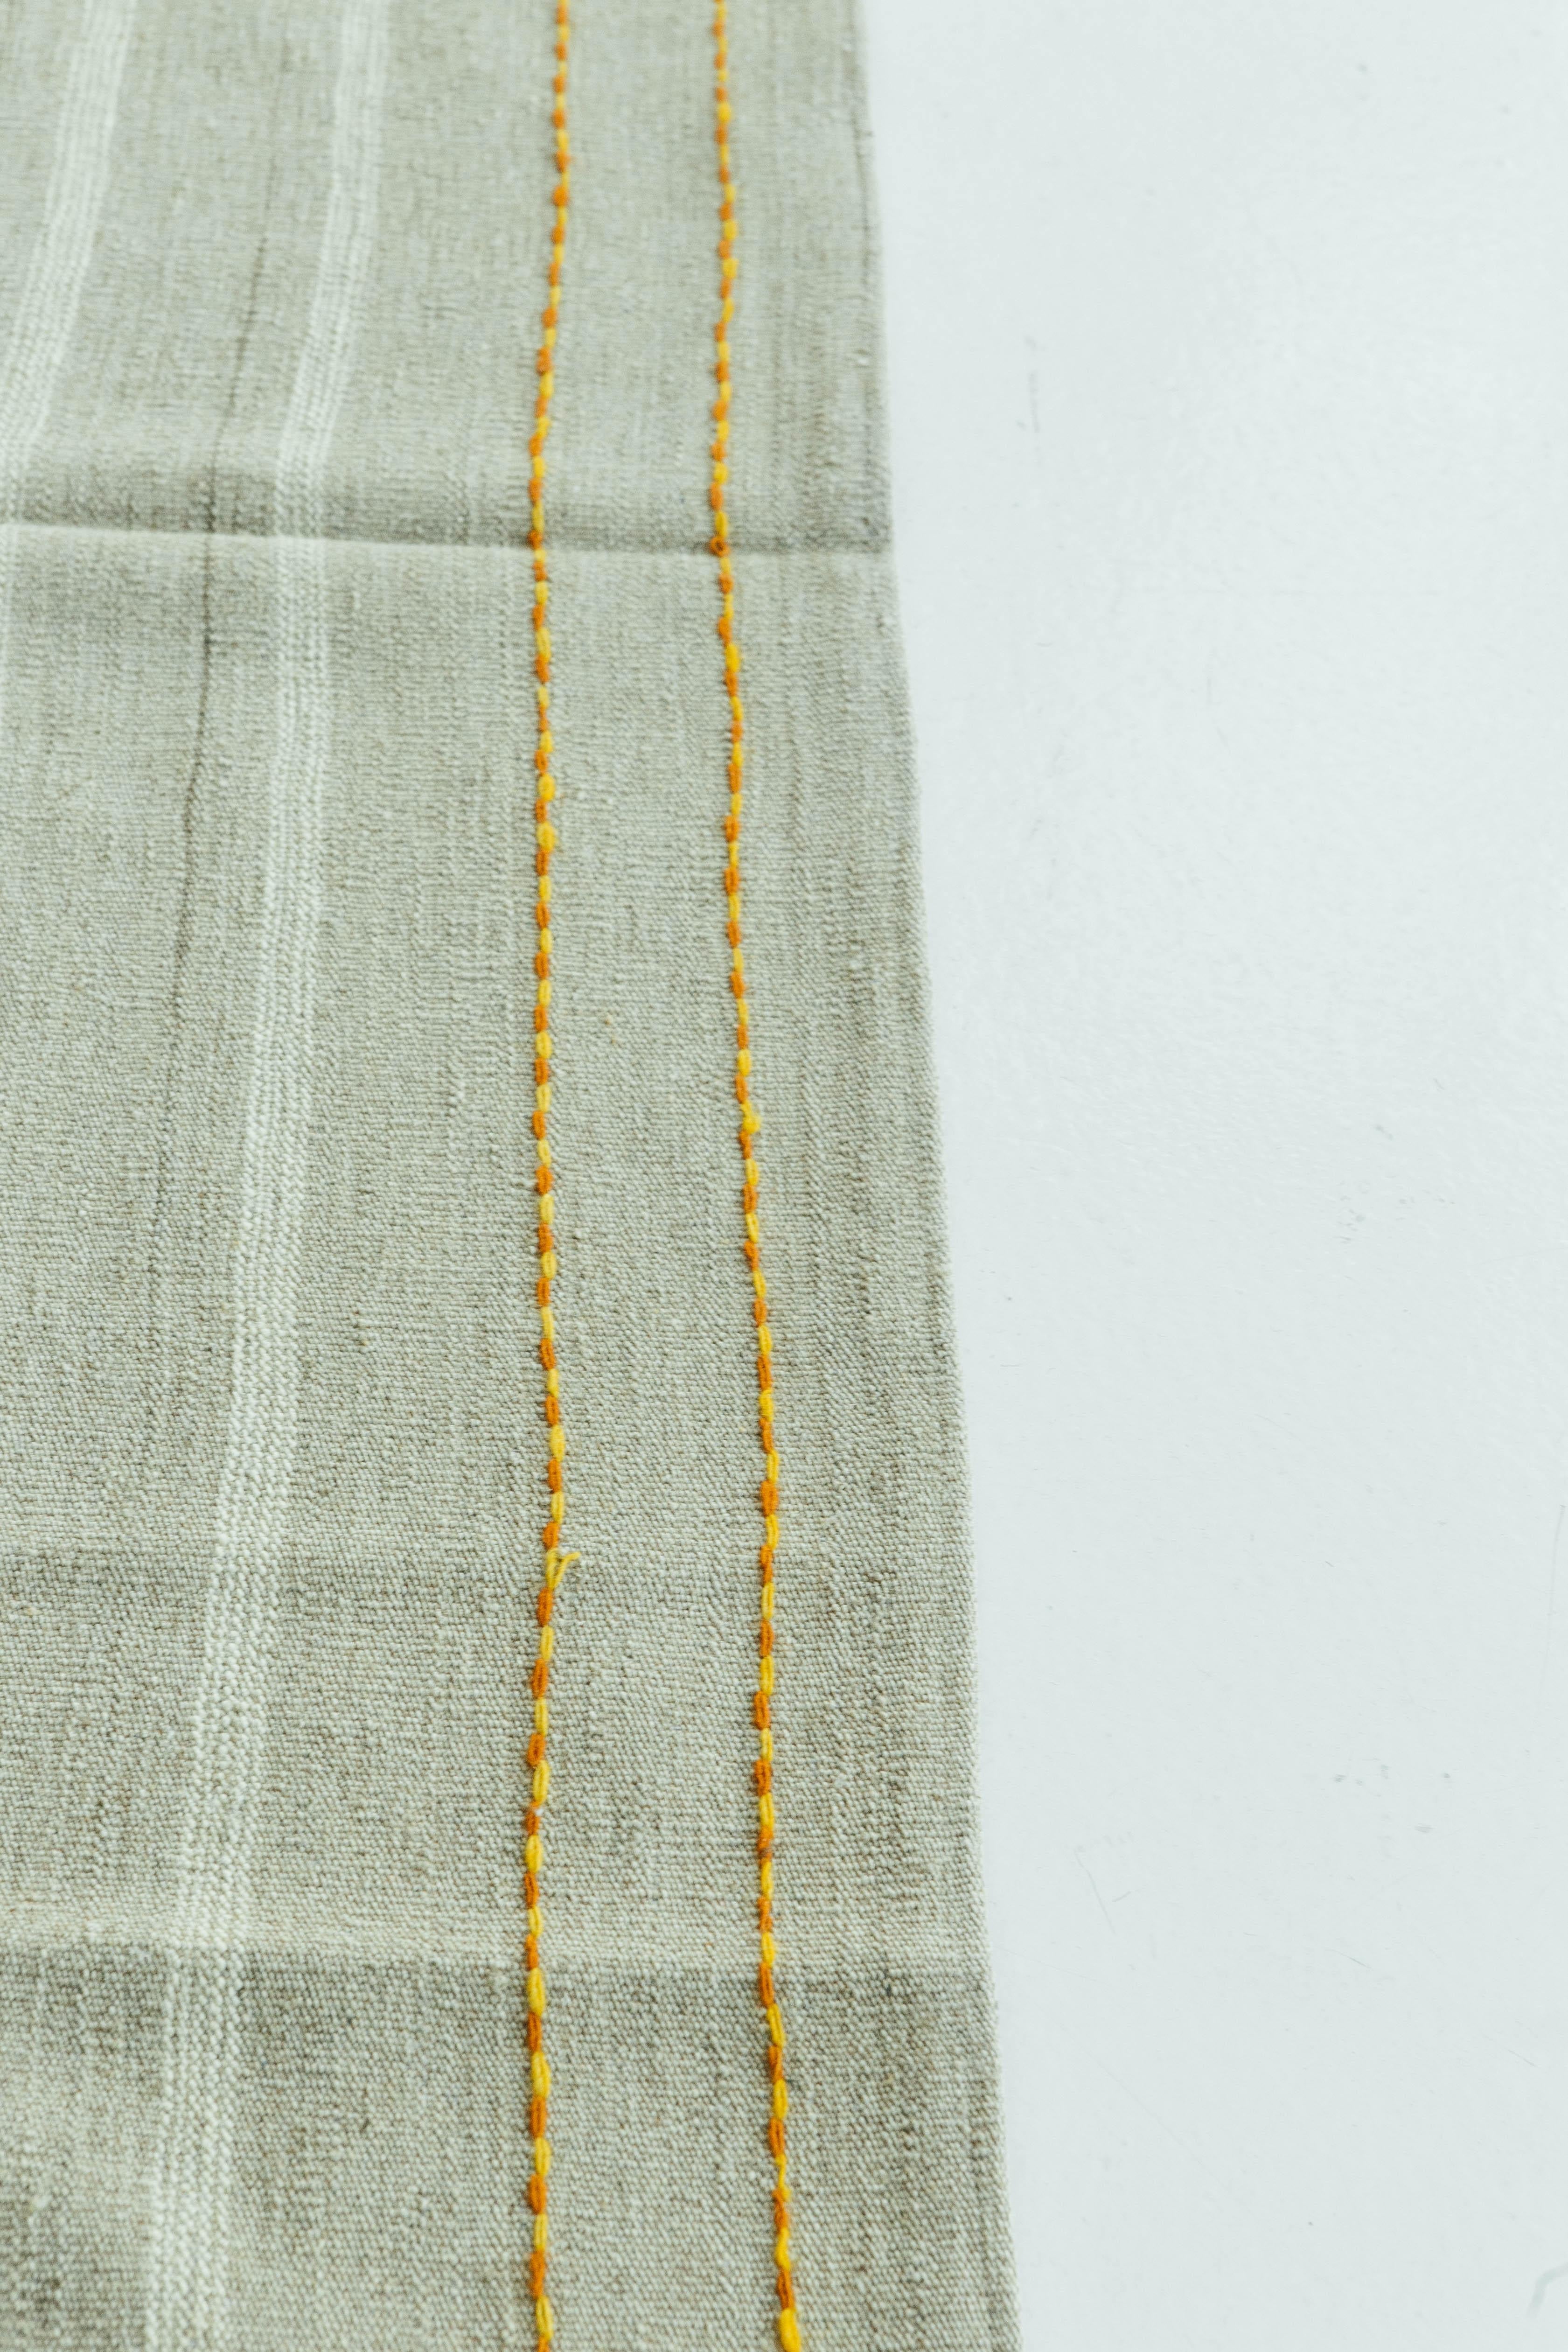 Natural taupe and ivory banded flat-weave in an alternating stripe pattern. Red and yellow detailing run across the top and bottom and add a touch of vibrancy. The Puro collection features contemporary designs handmade by skilled artisans in